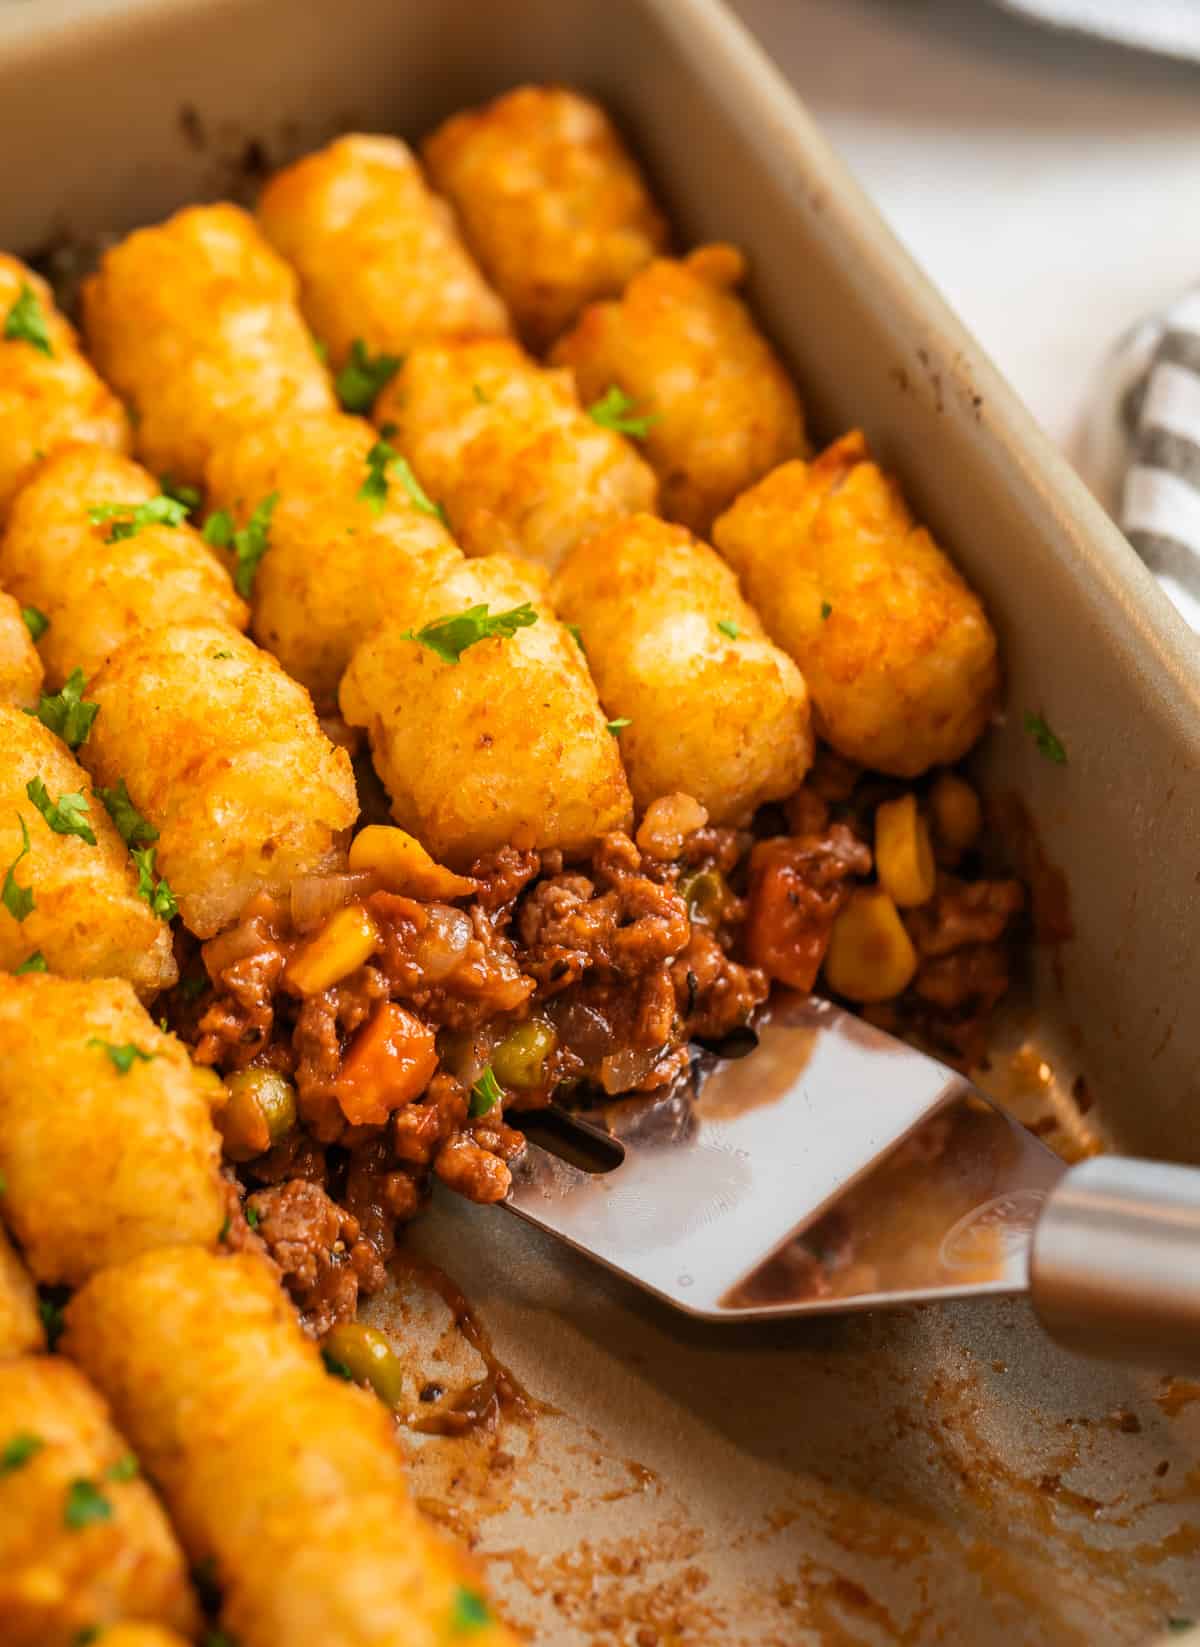 Tater tot topped beef mixture in baking pan with spatula scooping into the dish.